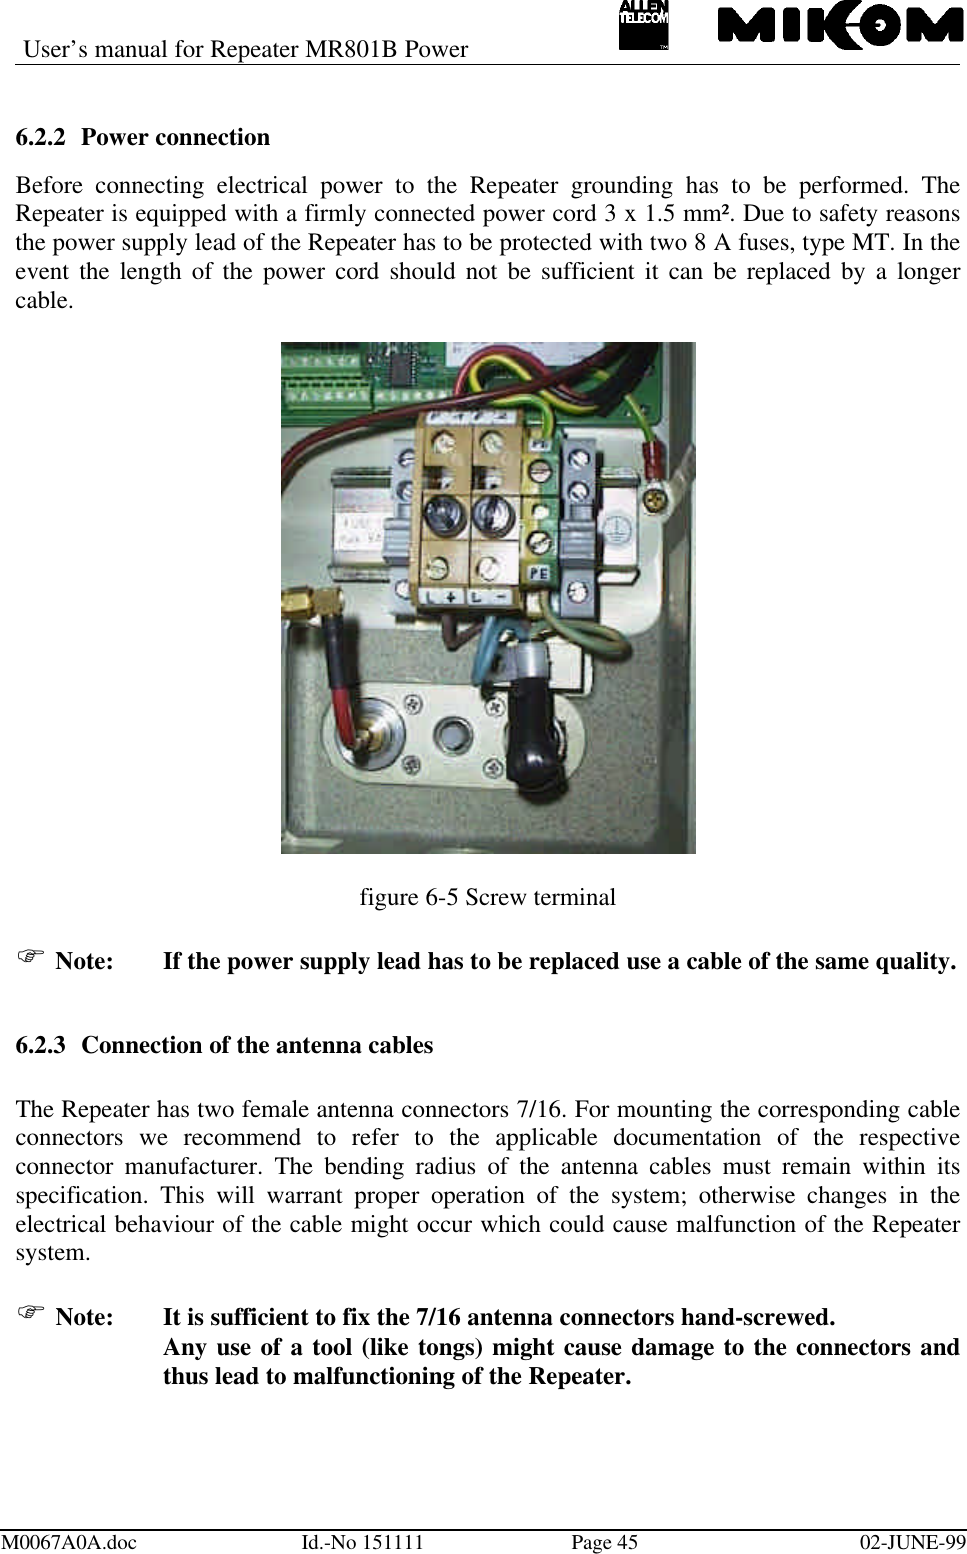 User’s manual for Repeater MR801B PowerM0067A0A.doc Id.-No 151111 Page 45 02-JUNE-996.2.2 Power connectionBefore connecting electrical power to the Repeater grounding has to be performed. TheRepeater is equipped with a firmly connected power cord 3 x 1.5 mm². Due to safety reasonsthe power supply lead of the Repeater has to be protected with two 8 A fuses, type MT. In theevent the length of the power cord should not be sufficient it can be replaced by a longercable.figure 6-5 Screw terminalF Note: If the power supply lead has to be replaced use a cable of the same quality.6.2.3 Connection of the antenna cablesThe Repeater has two female antenna connectors 7/16. For mounting the corresponding cableconnectors we recommend to refer to the applicable documentation of the respectiveconnector manufacturer. The bending radius of the antenna cables must remain within itsspecification. This will warrant proper operation of the system; otherwise changes in theelectrical behaviour of the cable might occur which could cause malfunction of the Repeatersystem.F Note:  It is sufficient to fix the 7/16 antenna connectors hand-screwed.Any use of a tool (like tongs) might cause damage to the connectors andthus lead to malfunctioning of the Repeater.